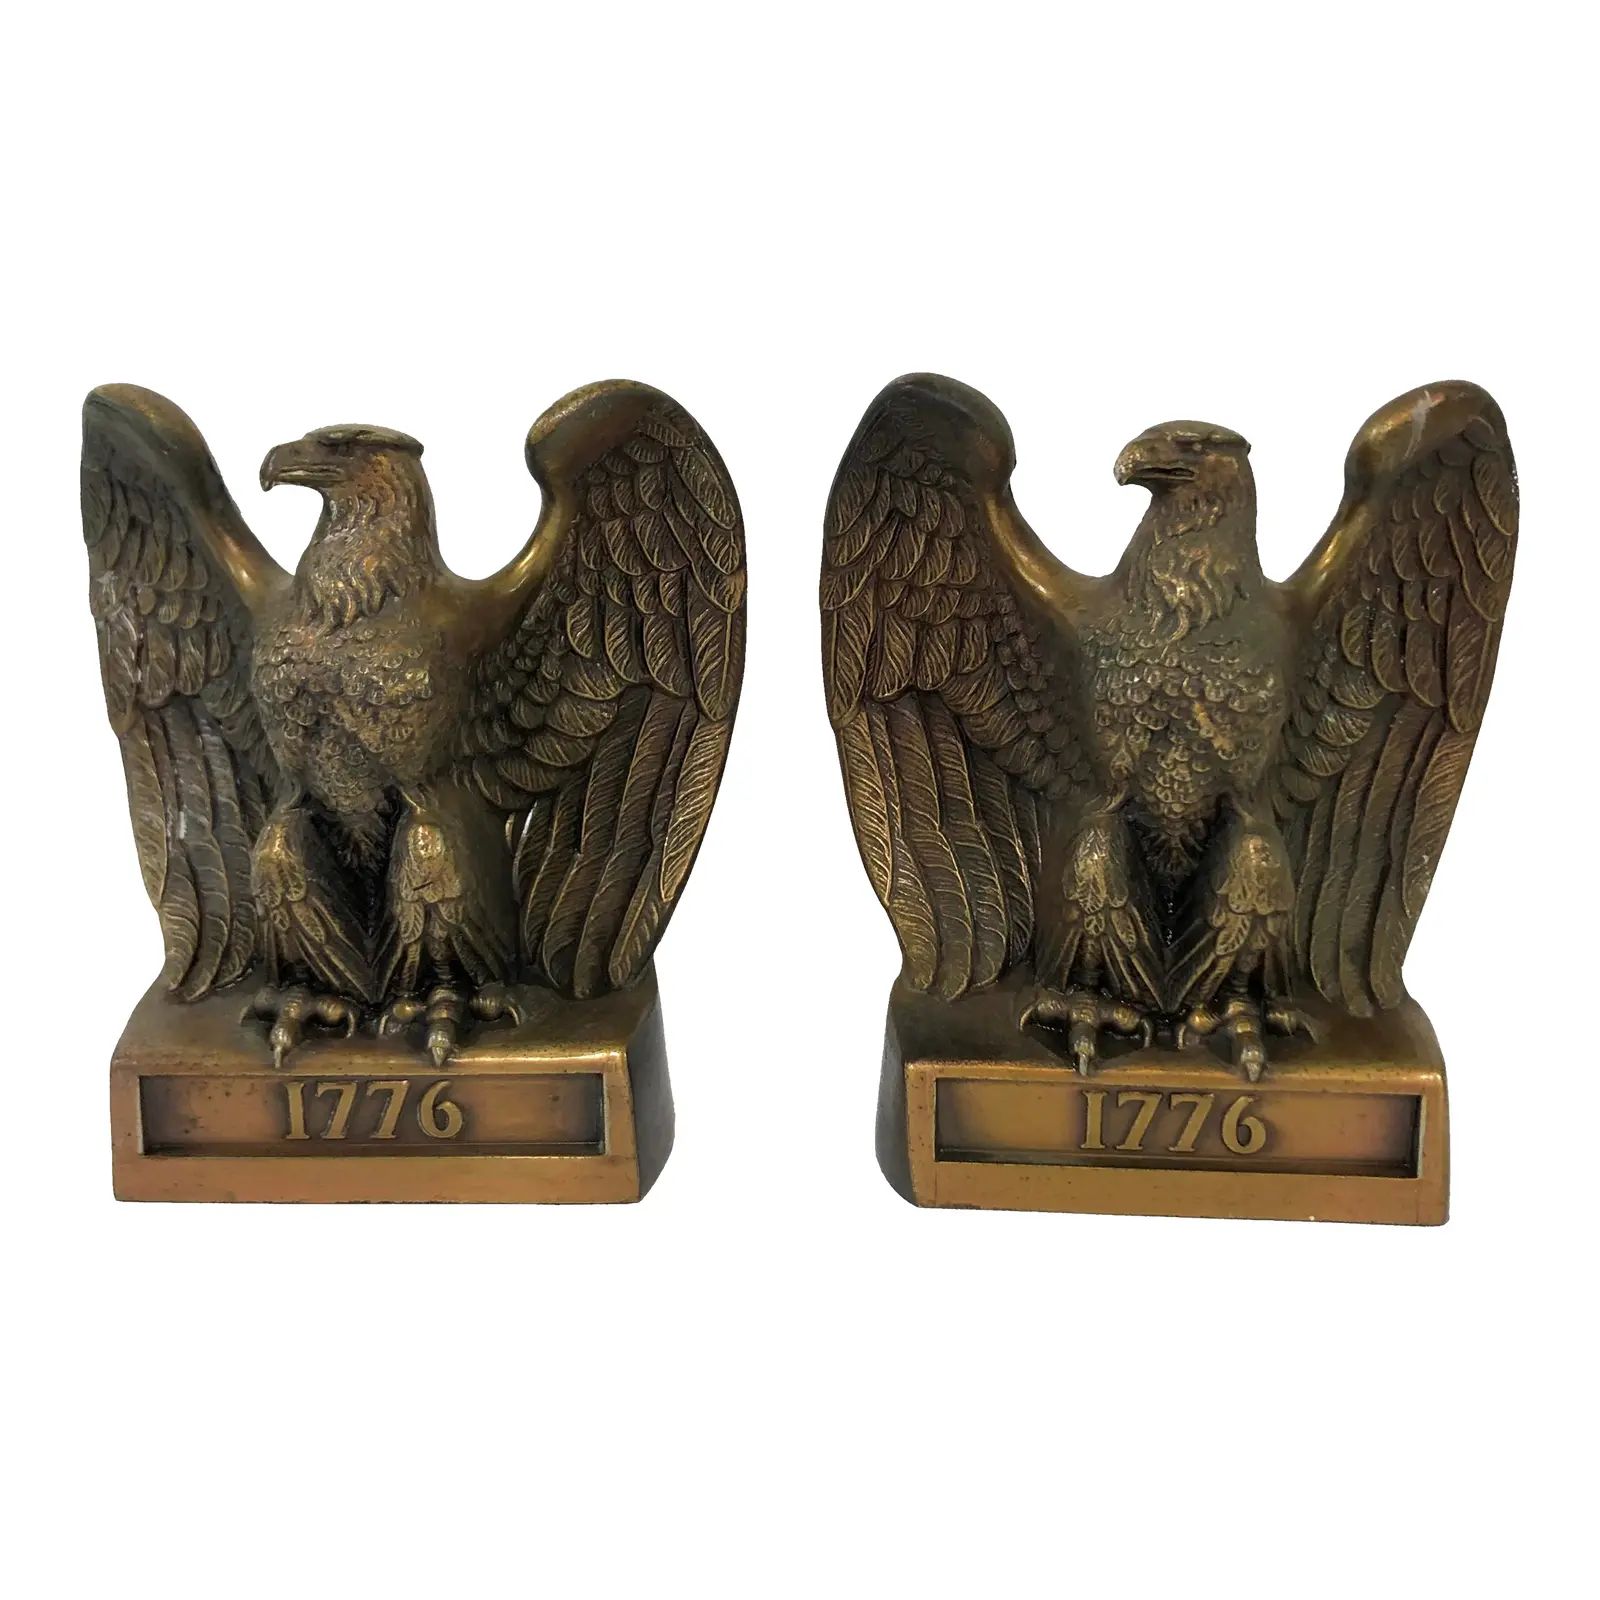 1970s Brass Finish American Eagle Metal Bookends - a Pair | Chairish